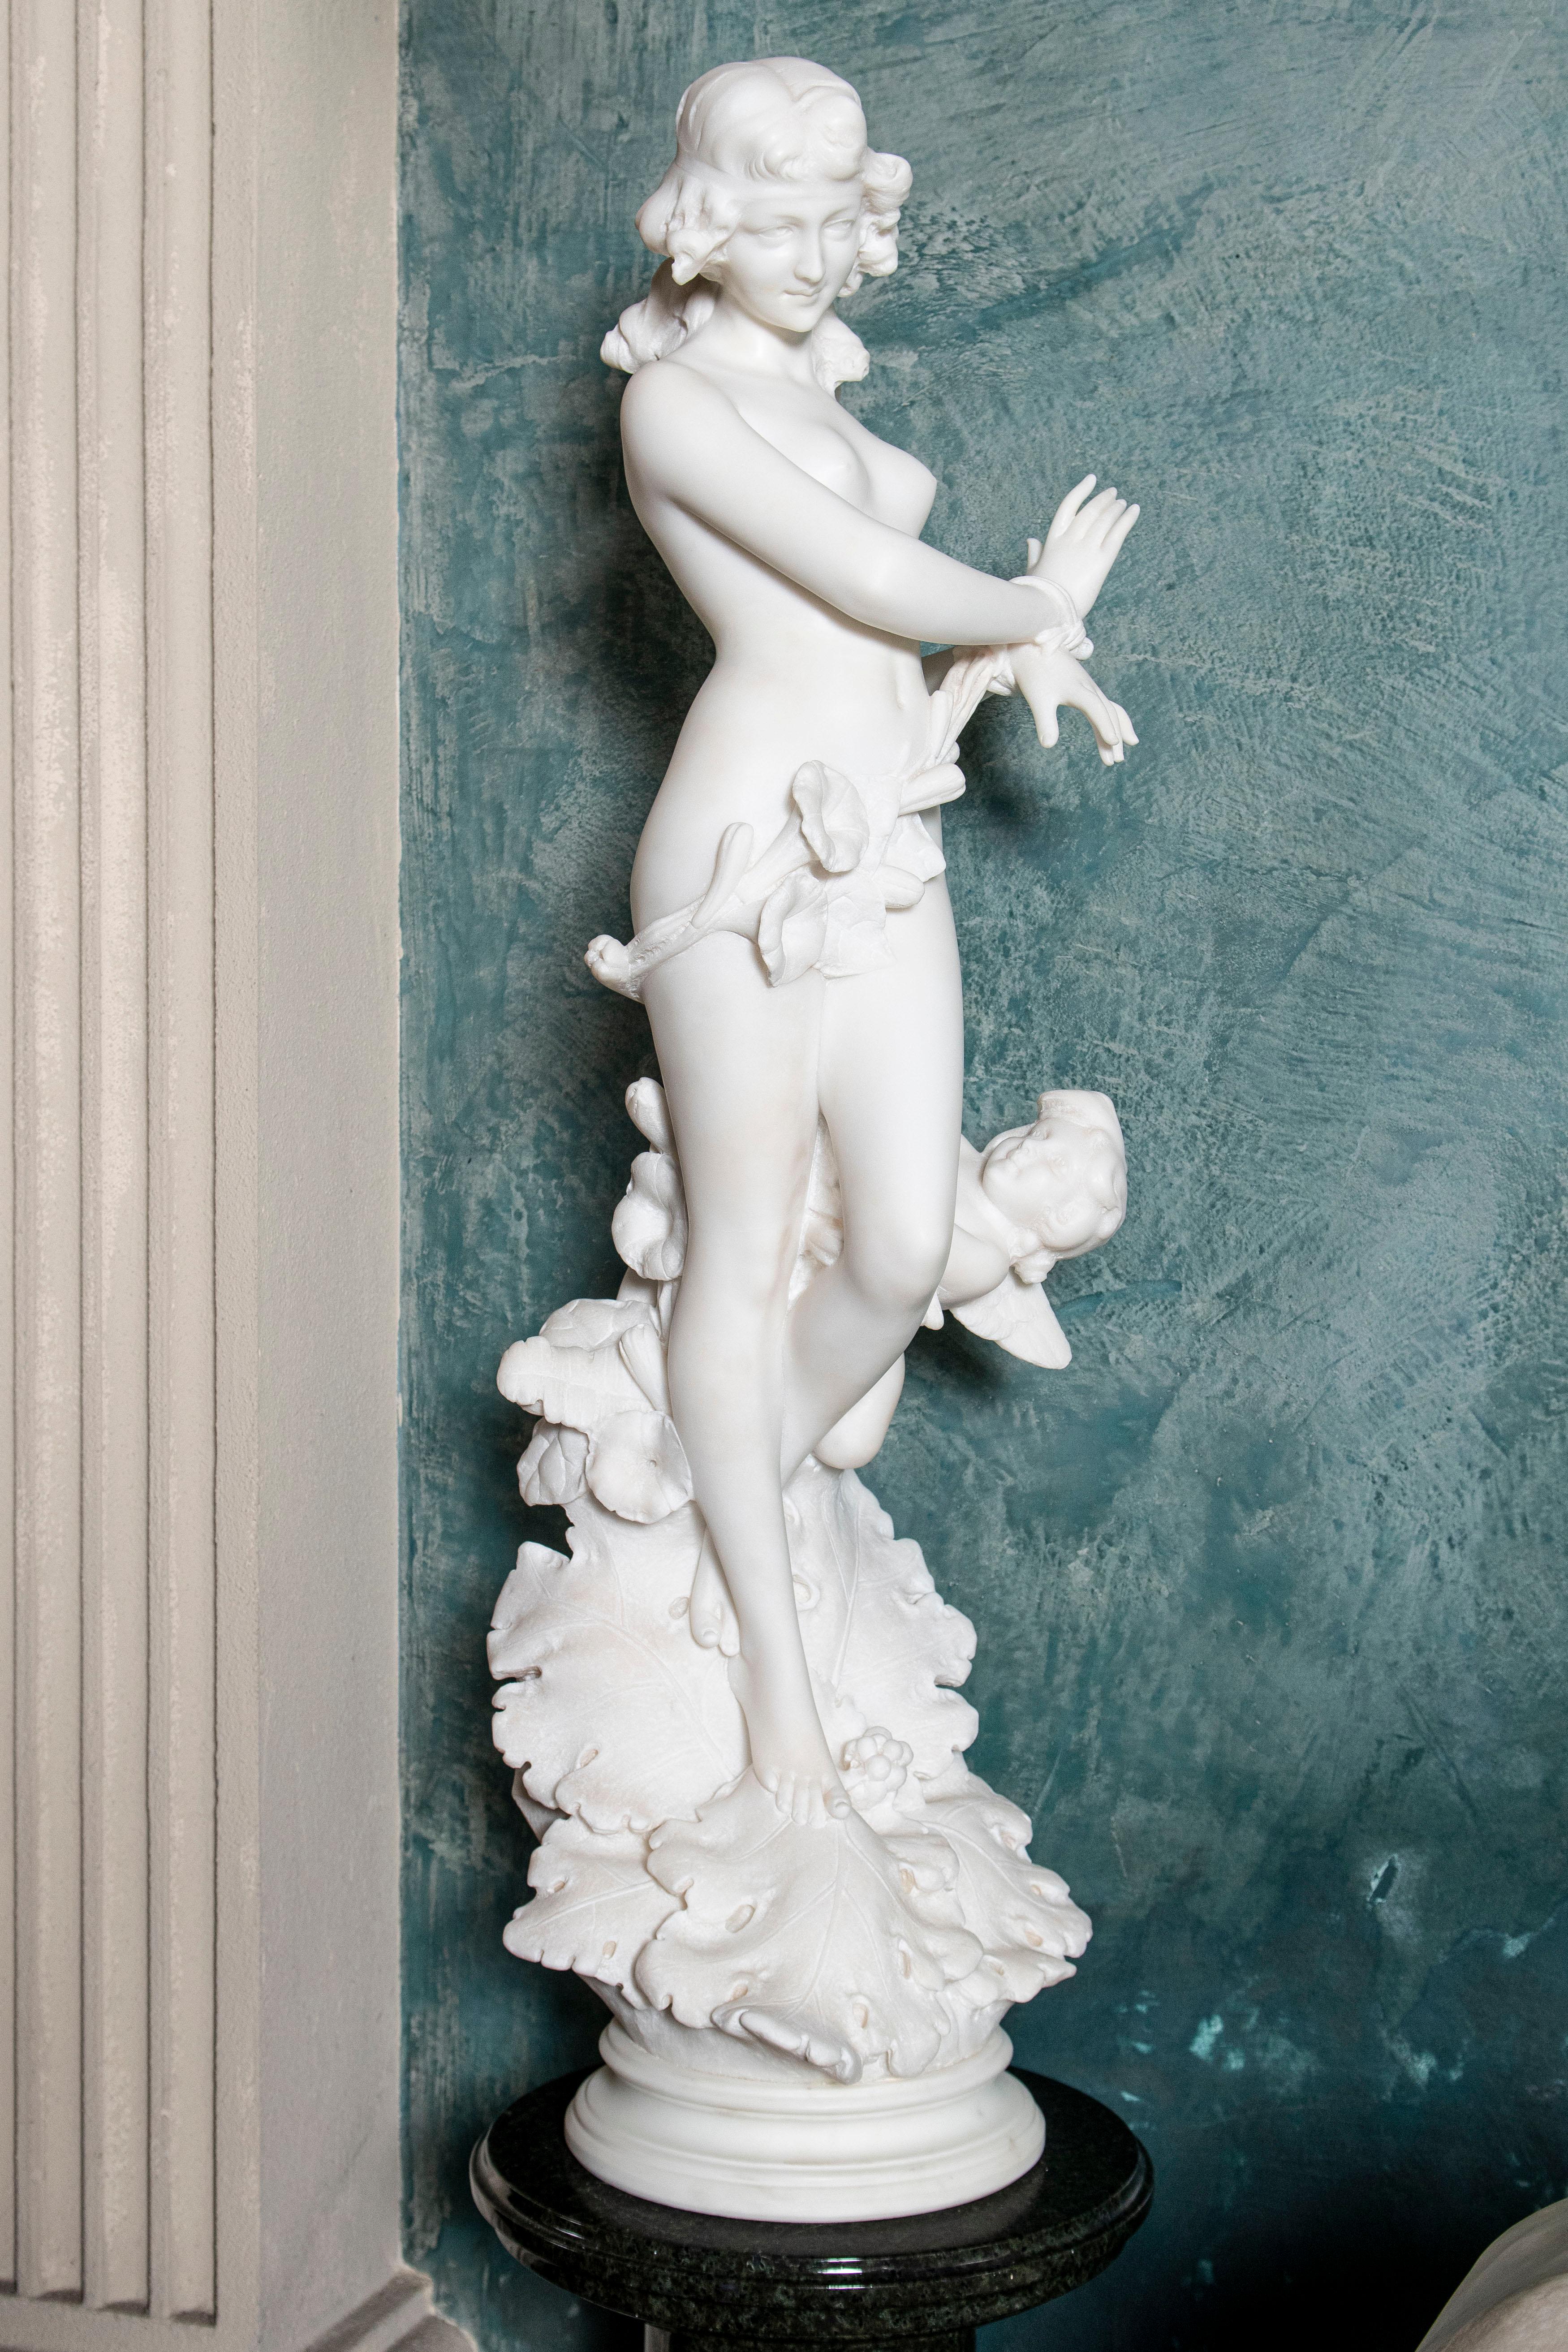 Carrara marble sculpture signed A. Batacchi, Italy, Florence, late 19th century.